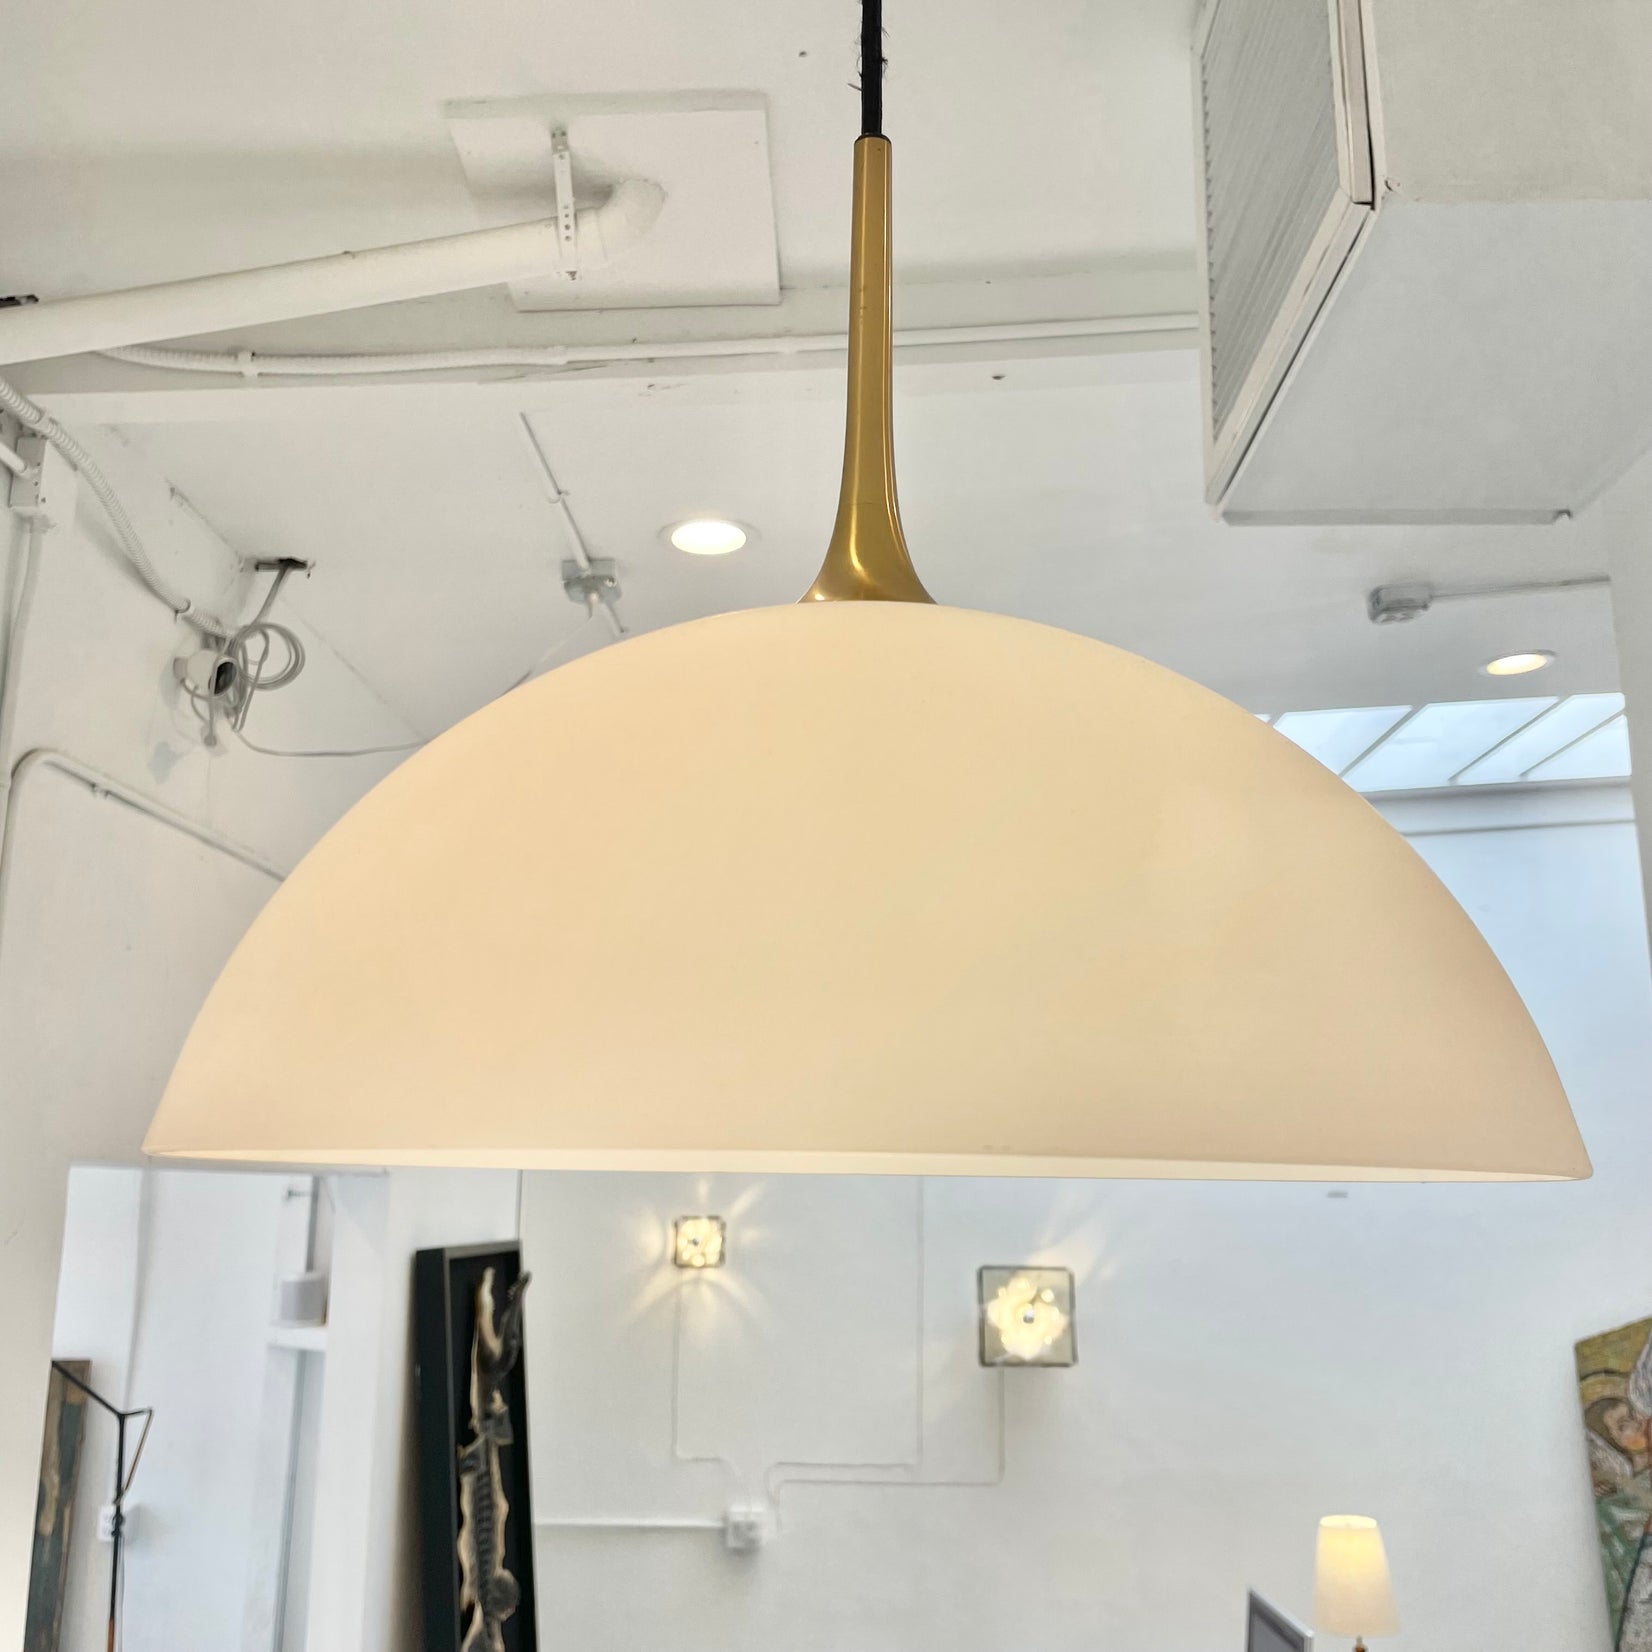 Florian Schulz Counter Balance Pendant with Frosted Glass Shade, Germany 1970s